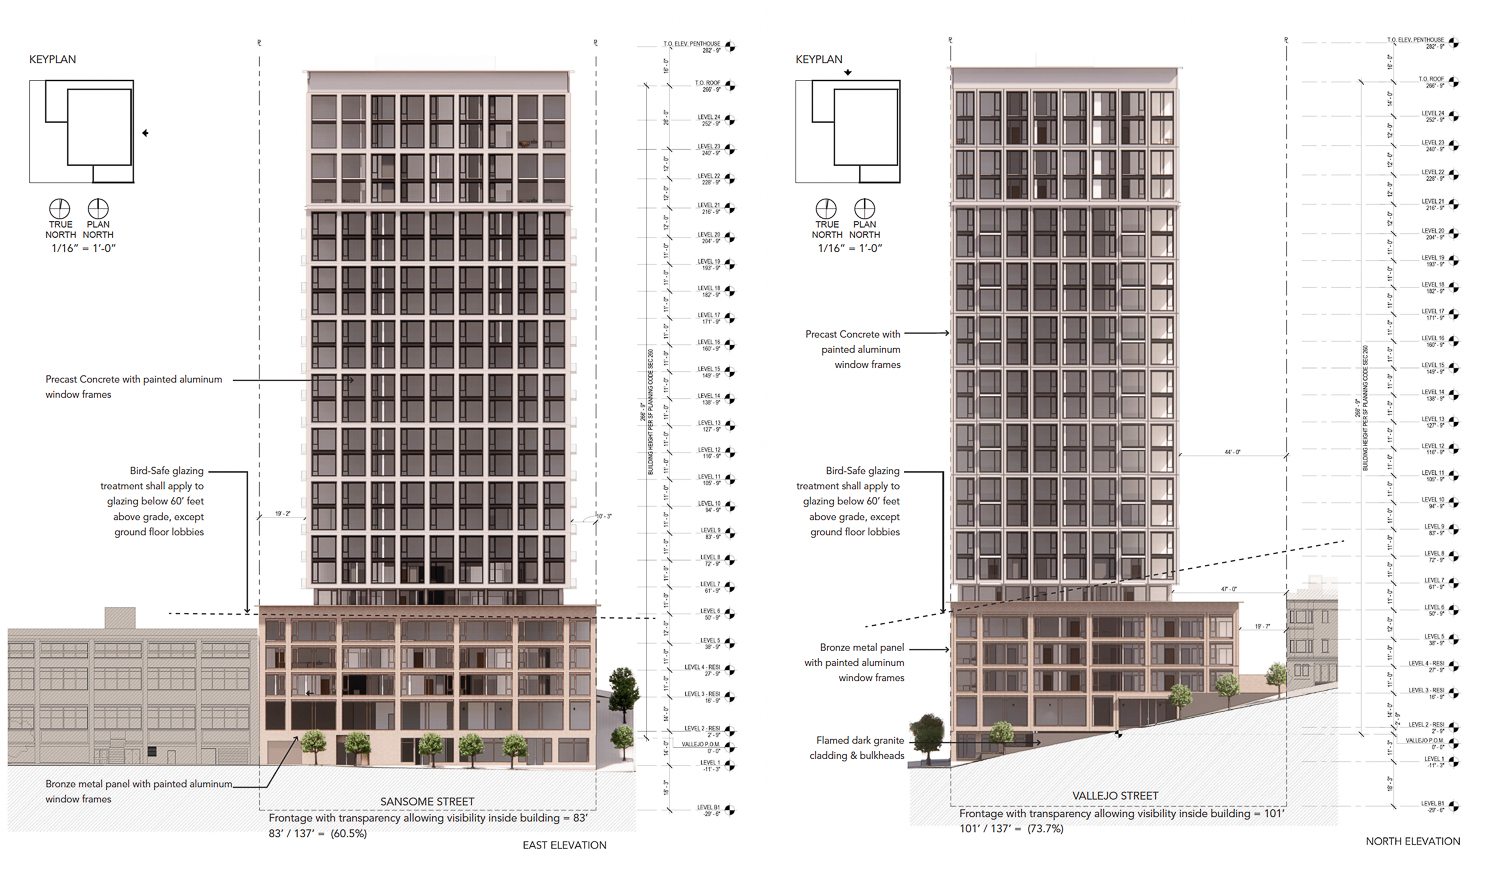 955 Sansome Street vertical elevations, illustration by Handel Architects